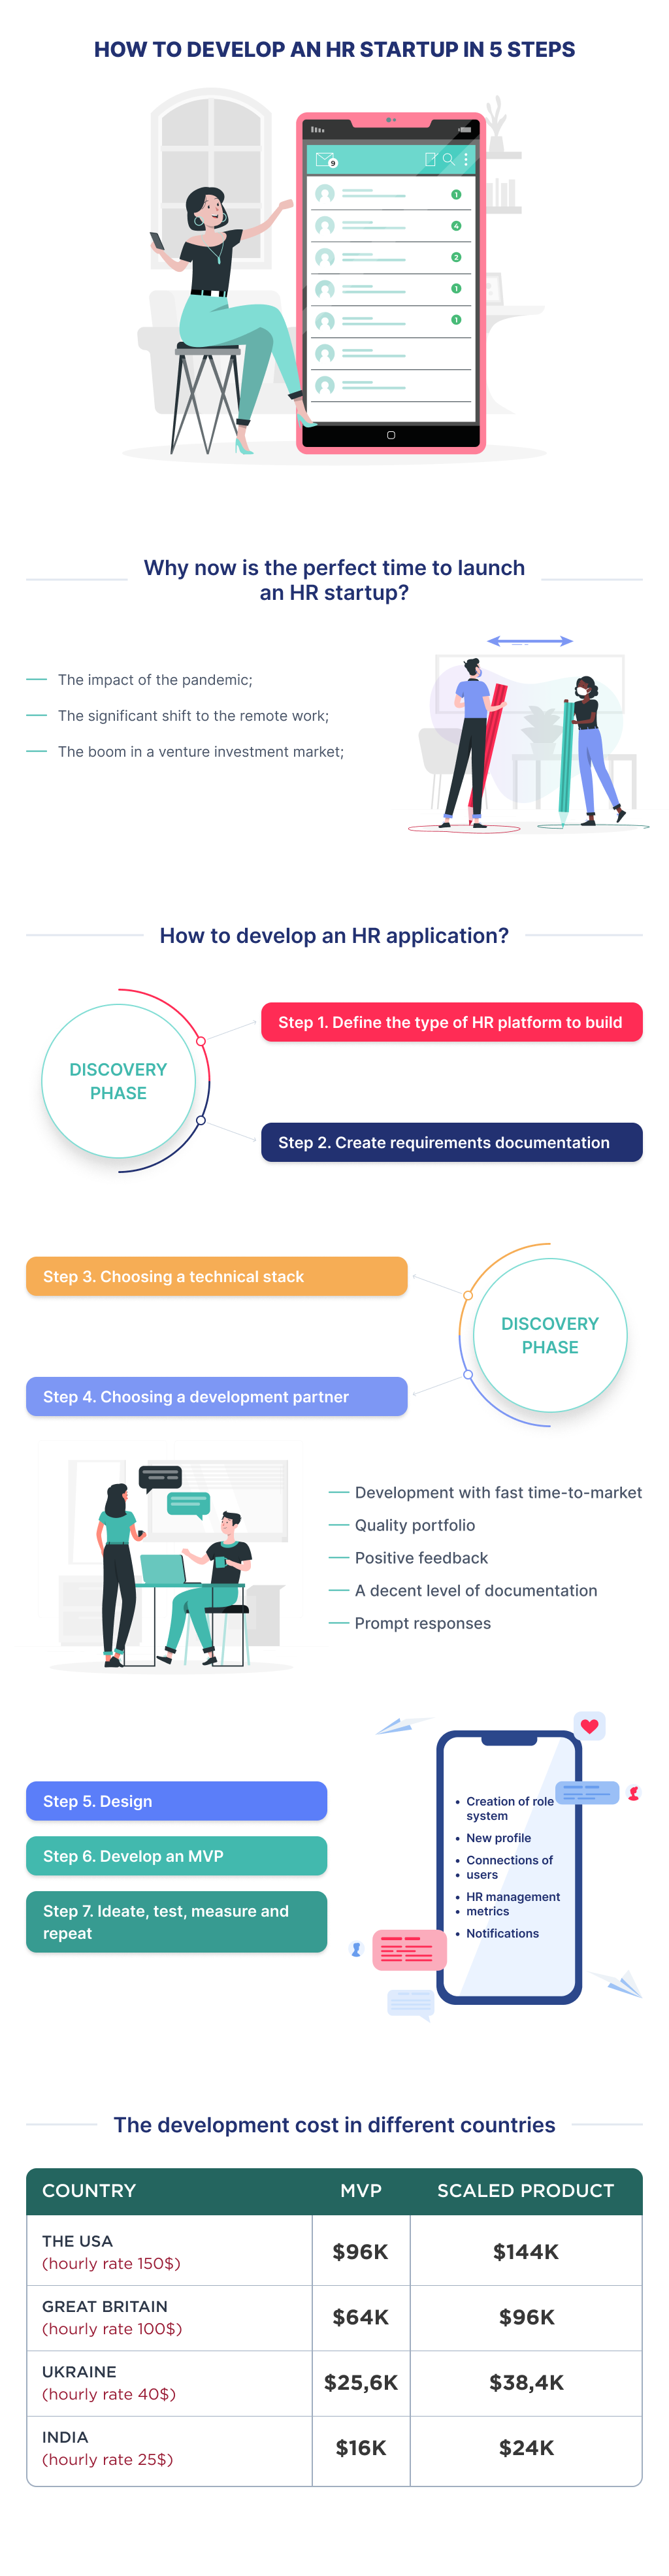 This infographic explains how to launch an HR app in 5 simple steps, from generating and validating an idea to developing and launching the app.